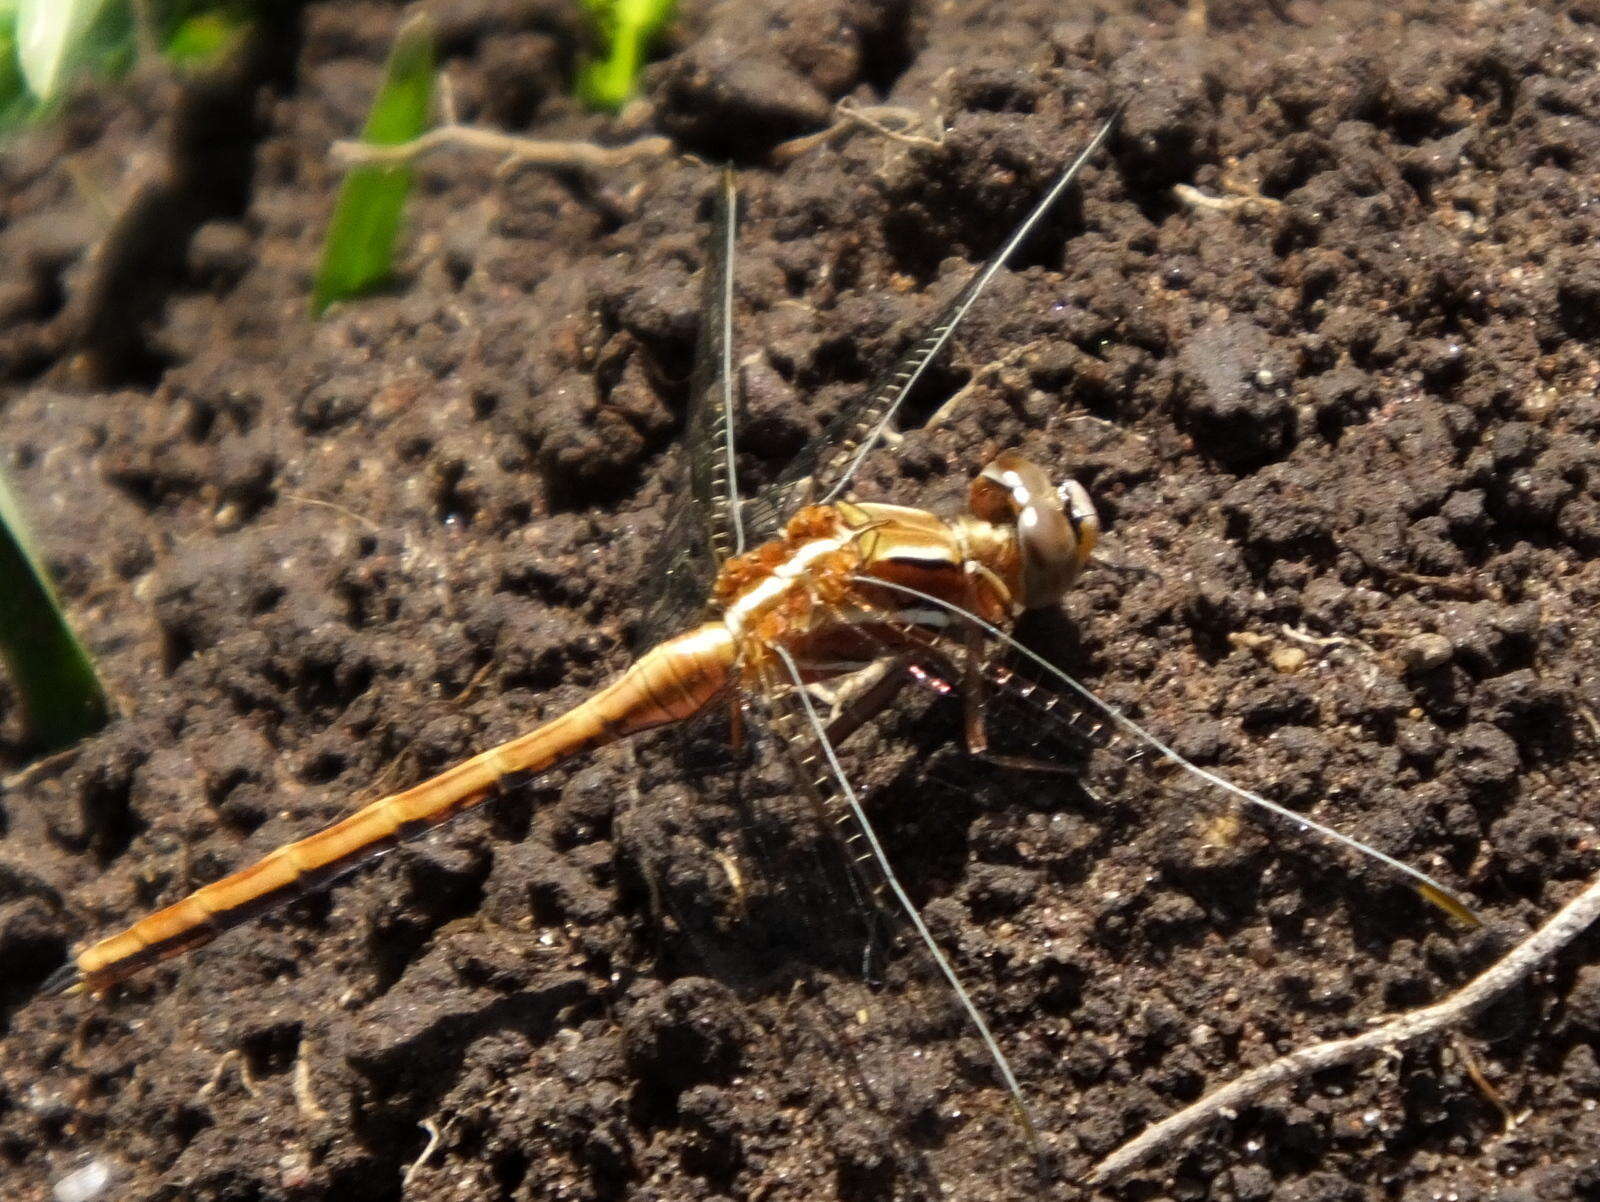 Image of Two-striped Skimmer